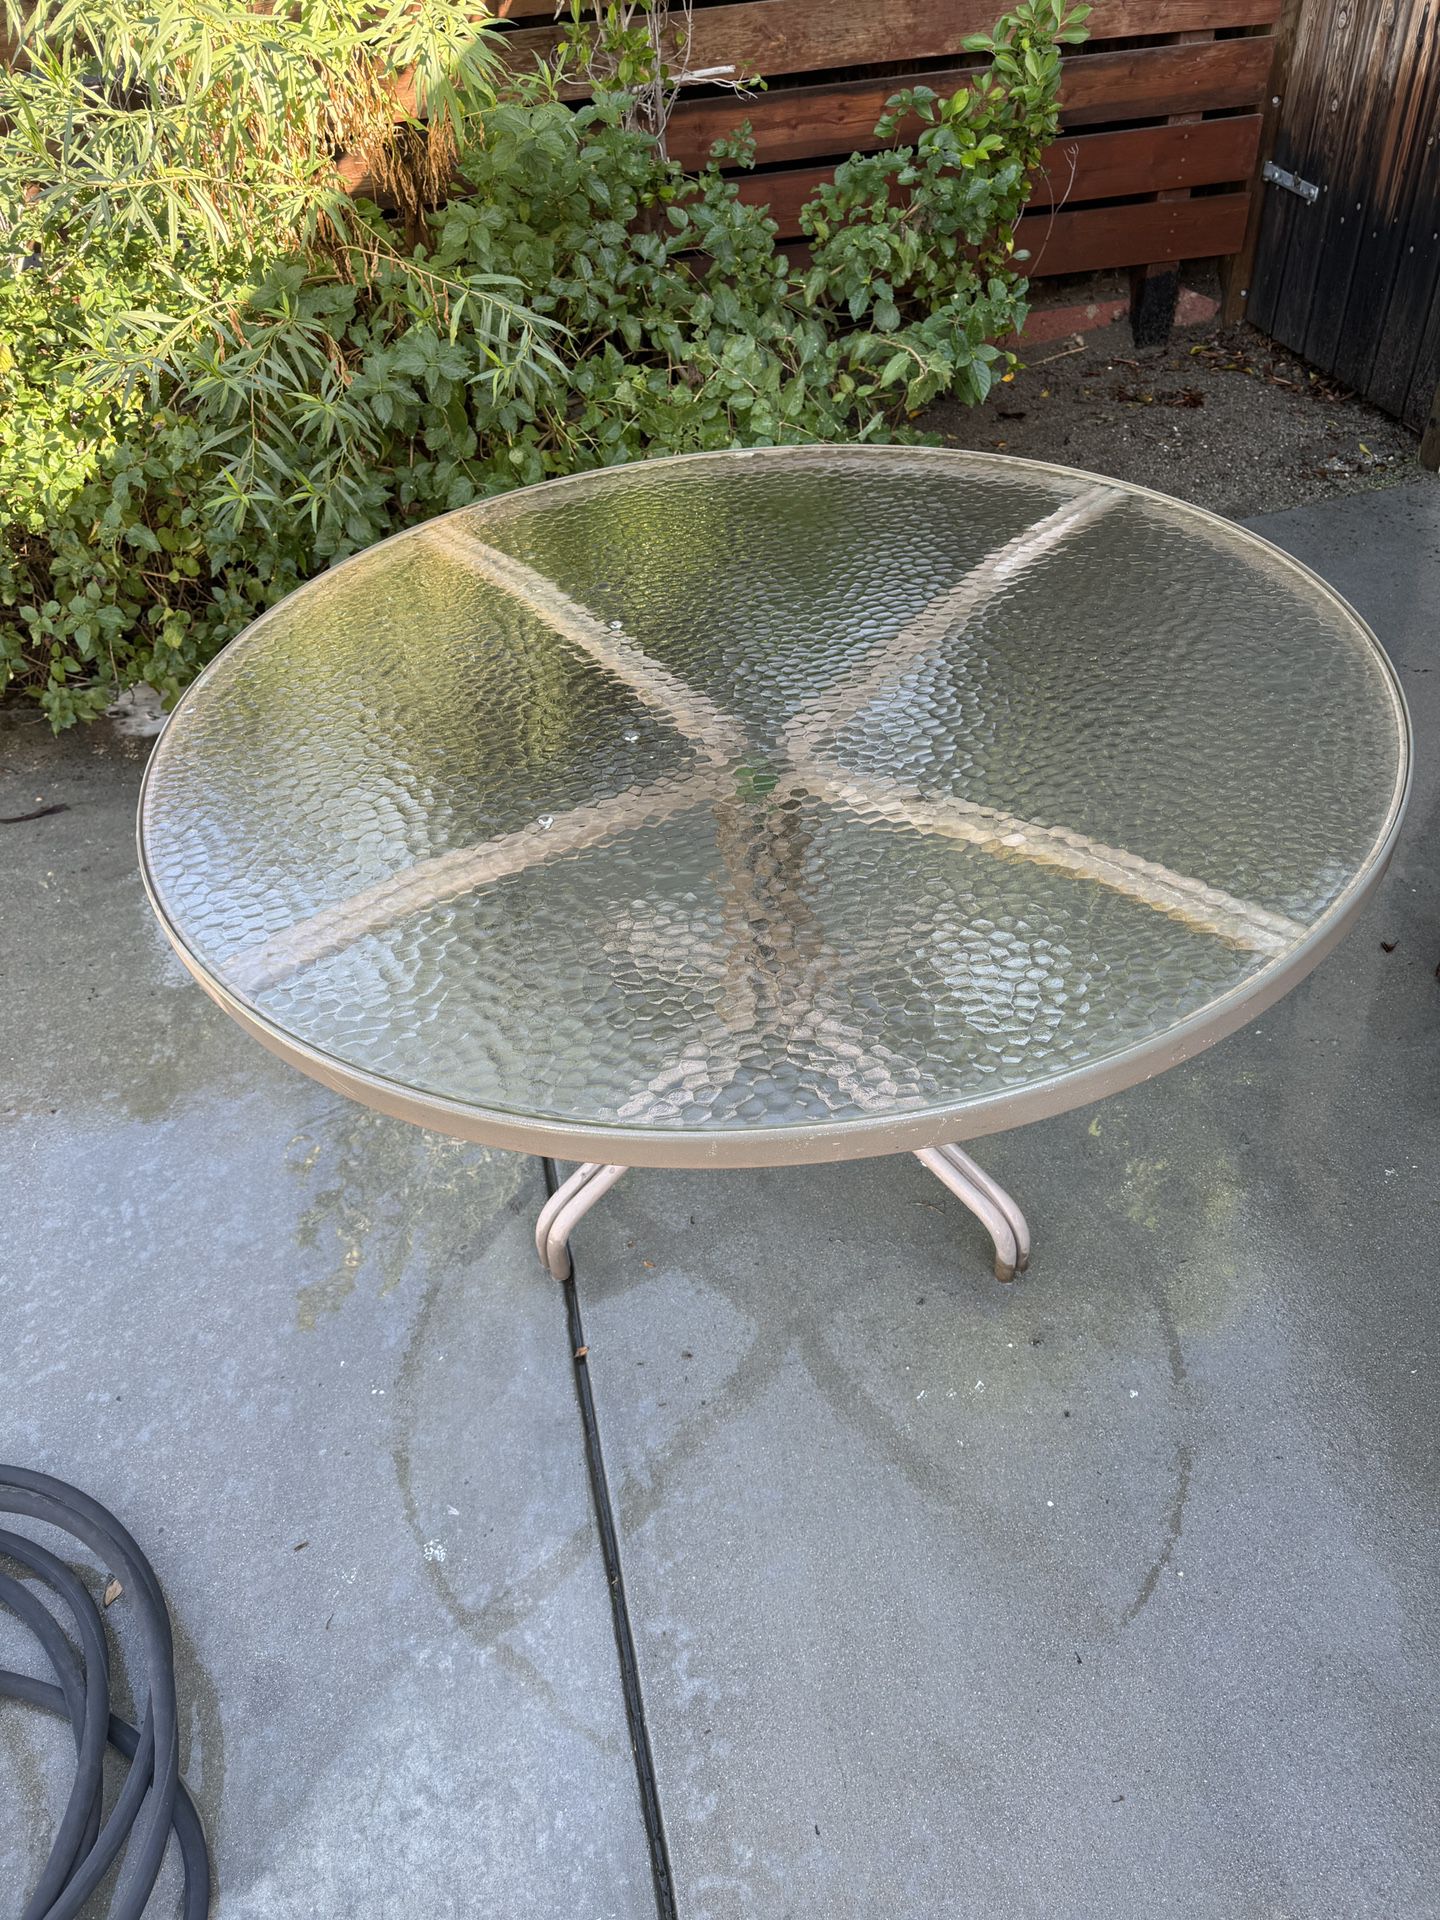 Glass Topped Outdoor Table - Price Reduced Again